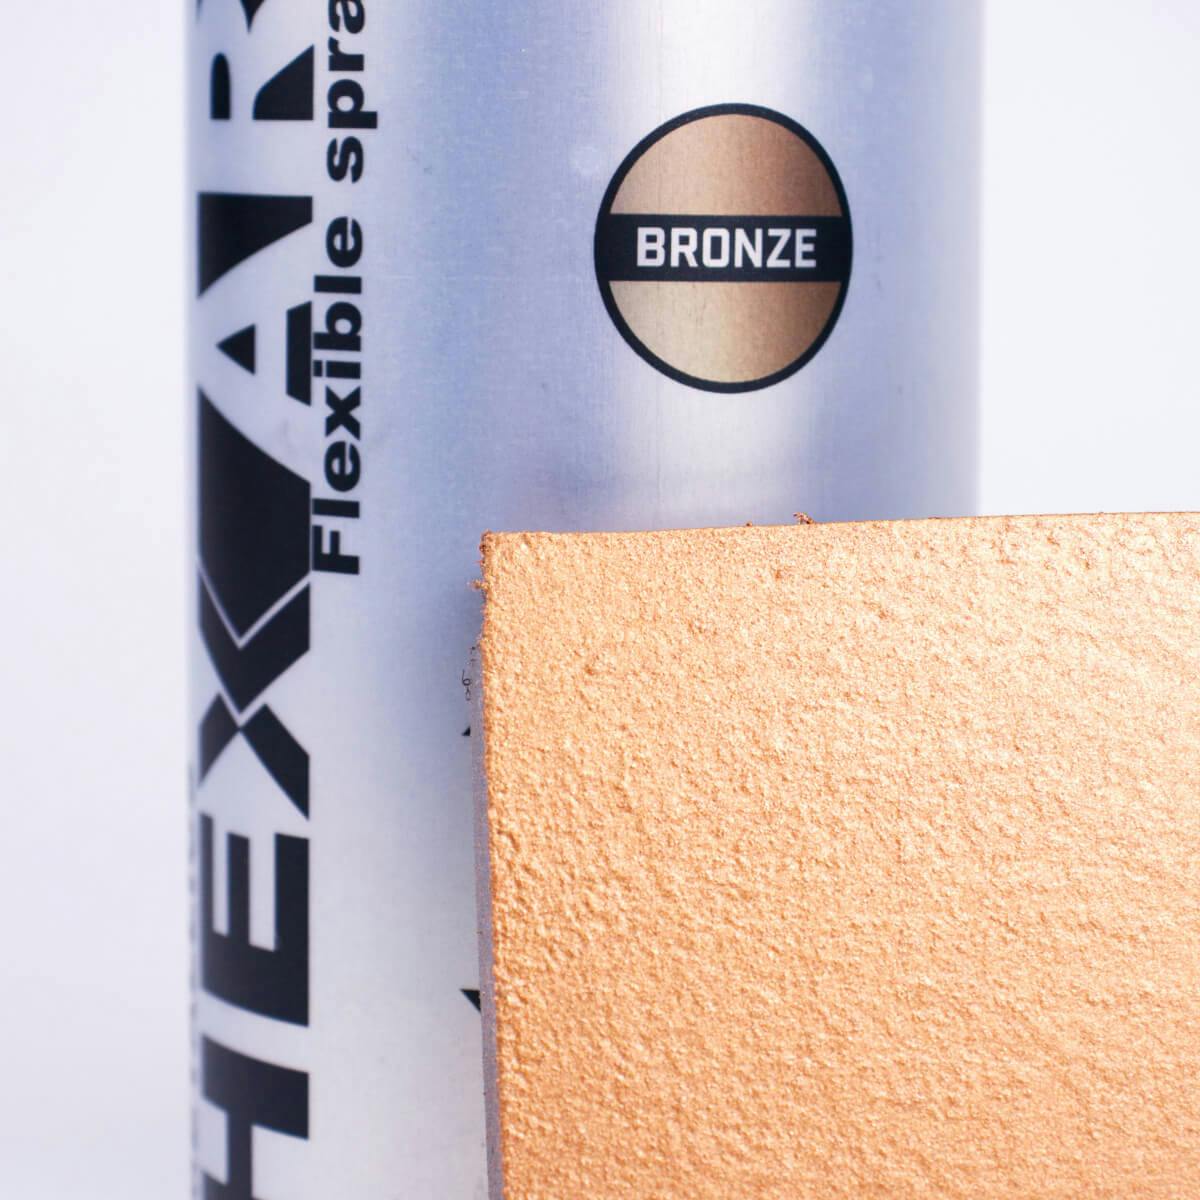 Container and sample of bronze HexArt spray paint